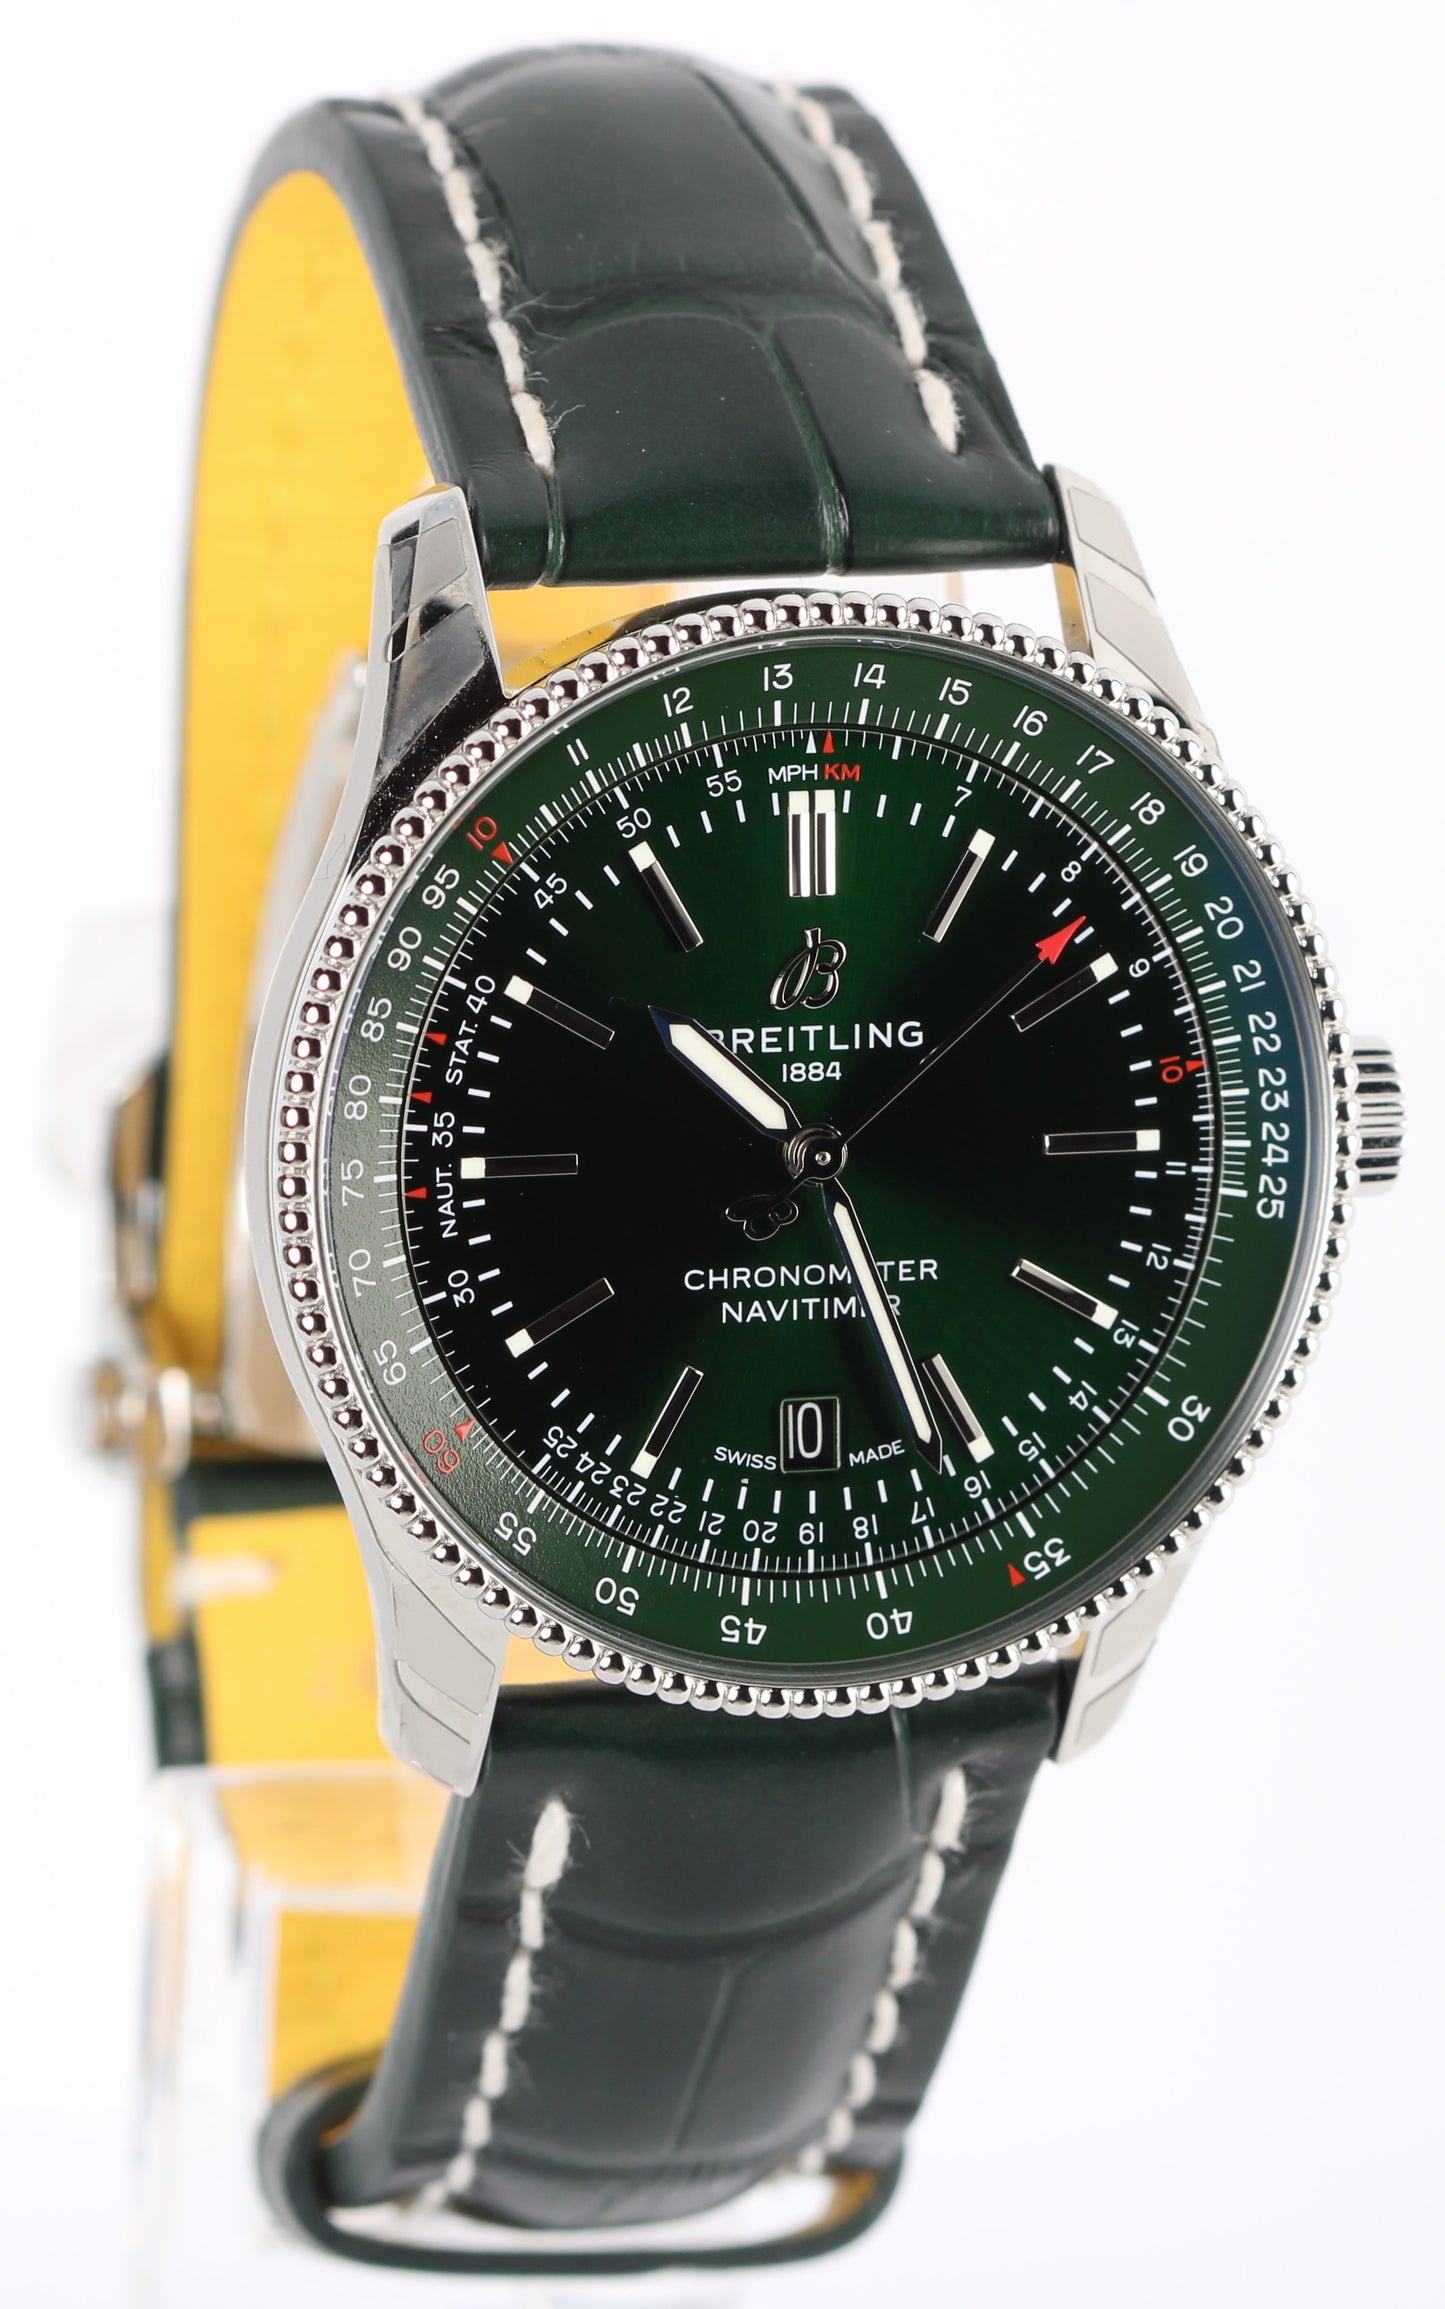 BRAND NEW Breitling Navitimer Automatic 41 PAPERS Green Leather A17326 Watch BOX